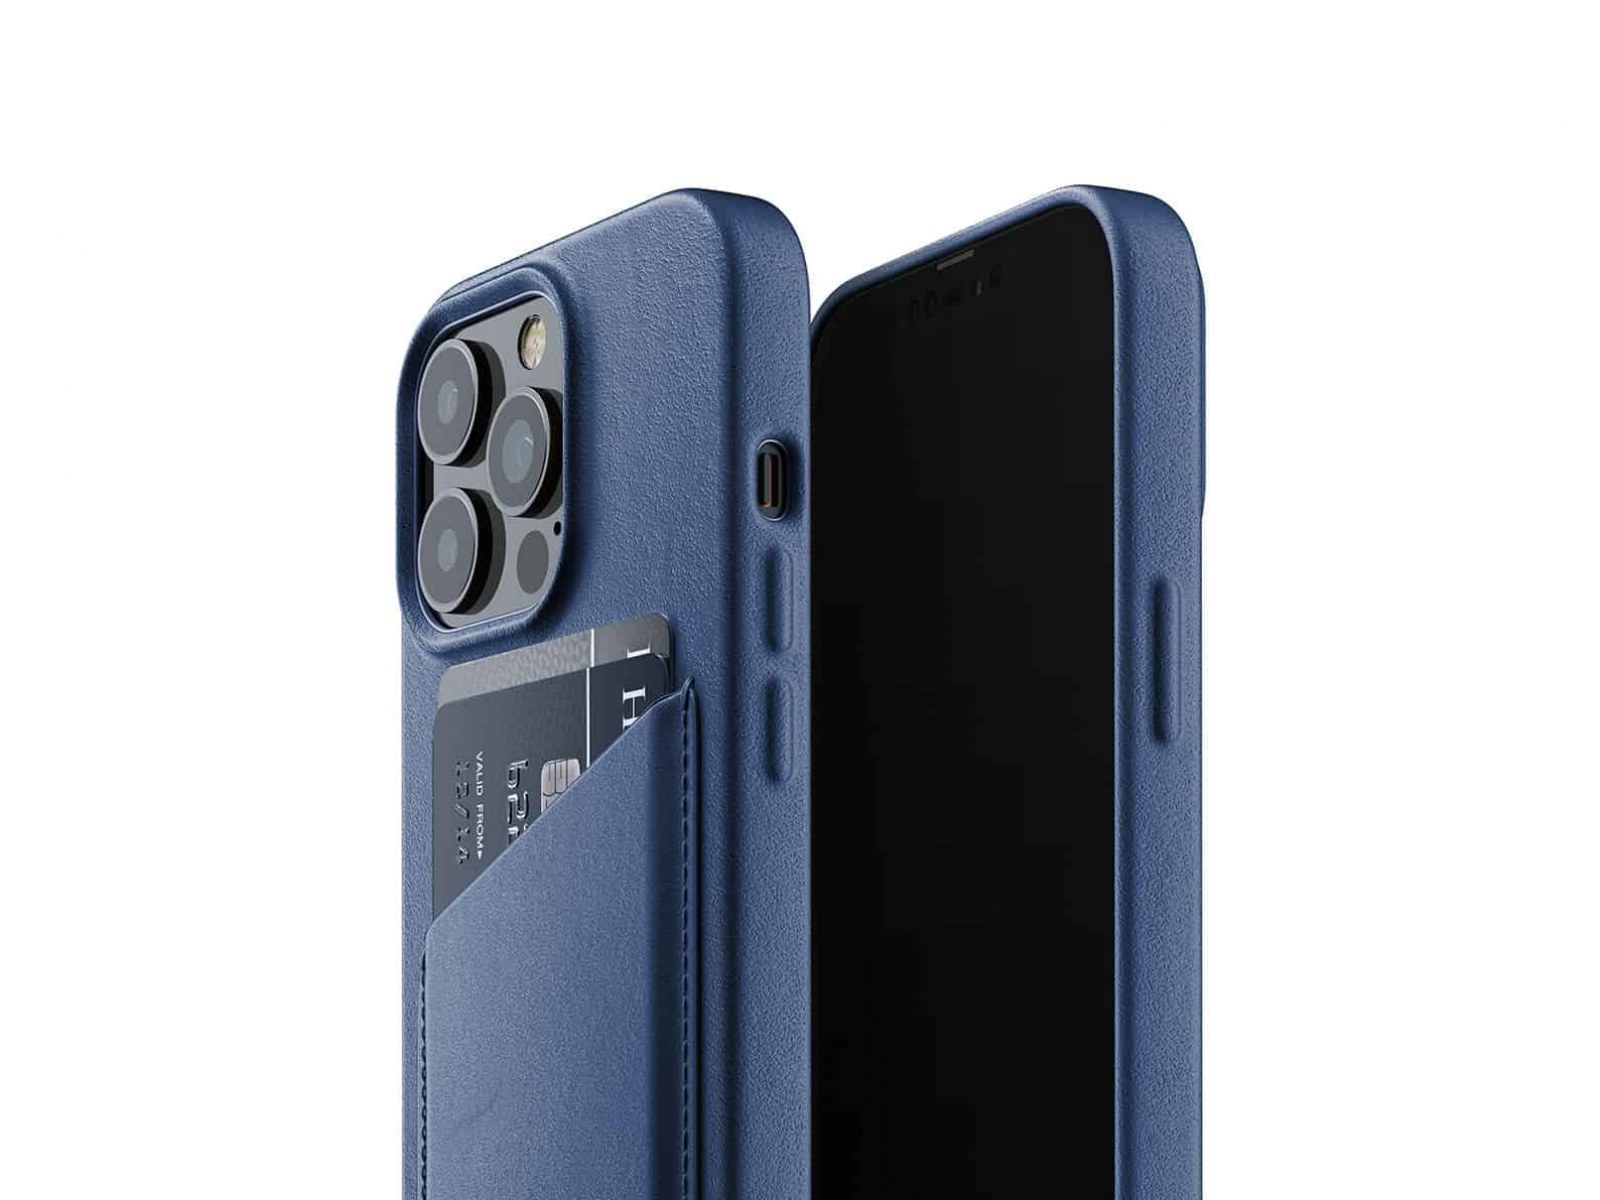 The Best iPhone 13 Cases: Mujjo, Nomad More